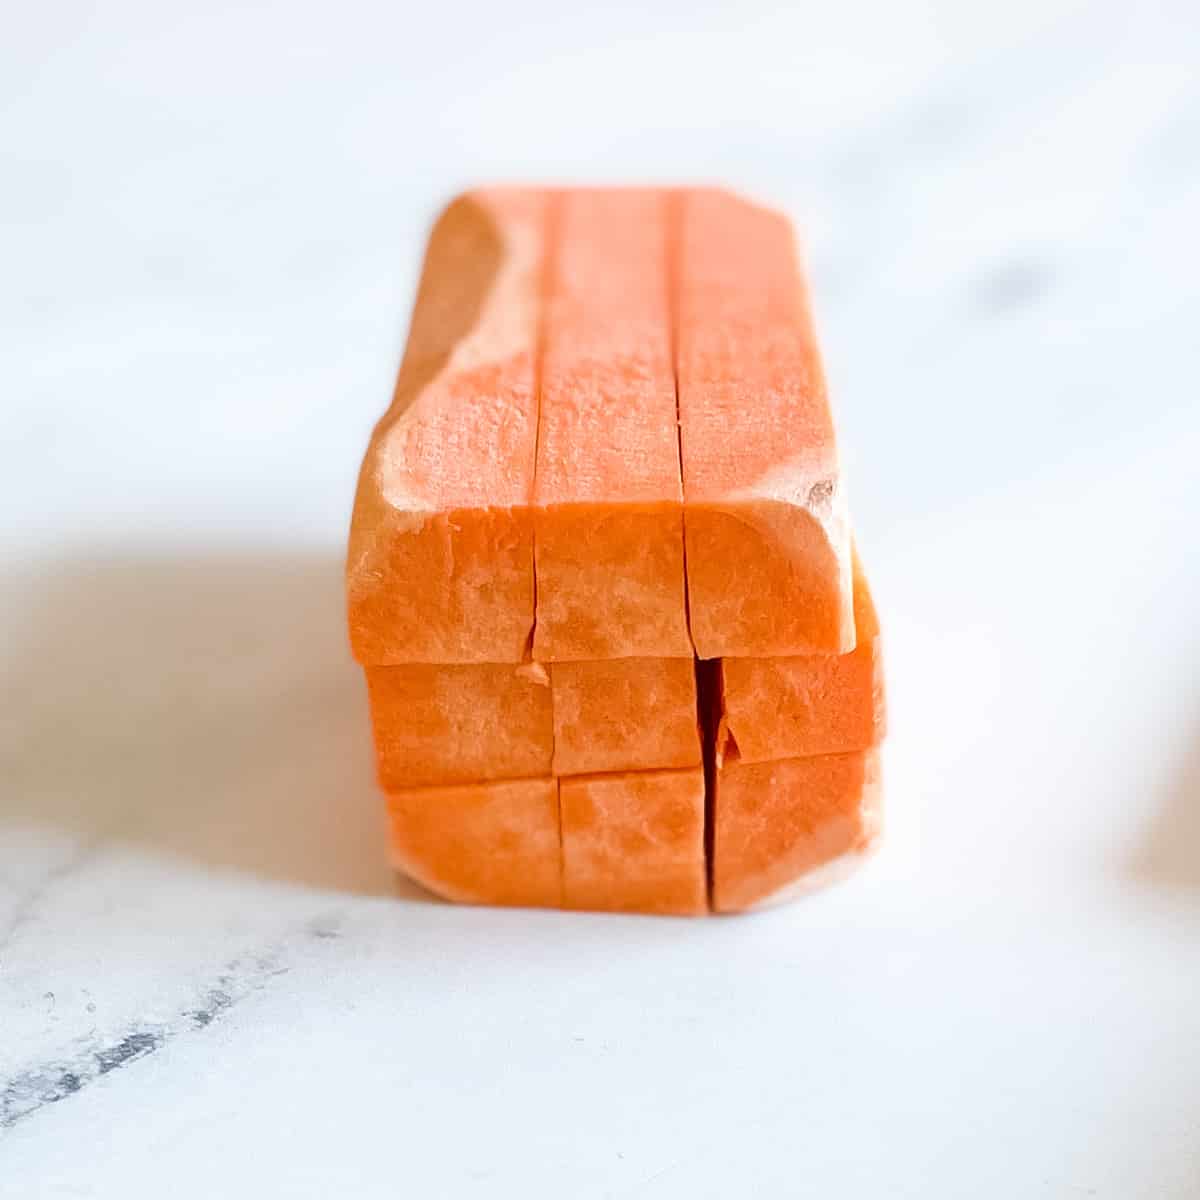 A peeled sweet potato cut both horizontally and diagonally into equal pieces to create long sticks sits on a white marble counter top.